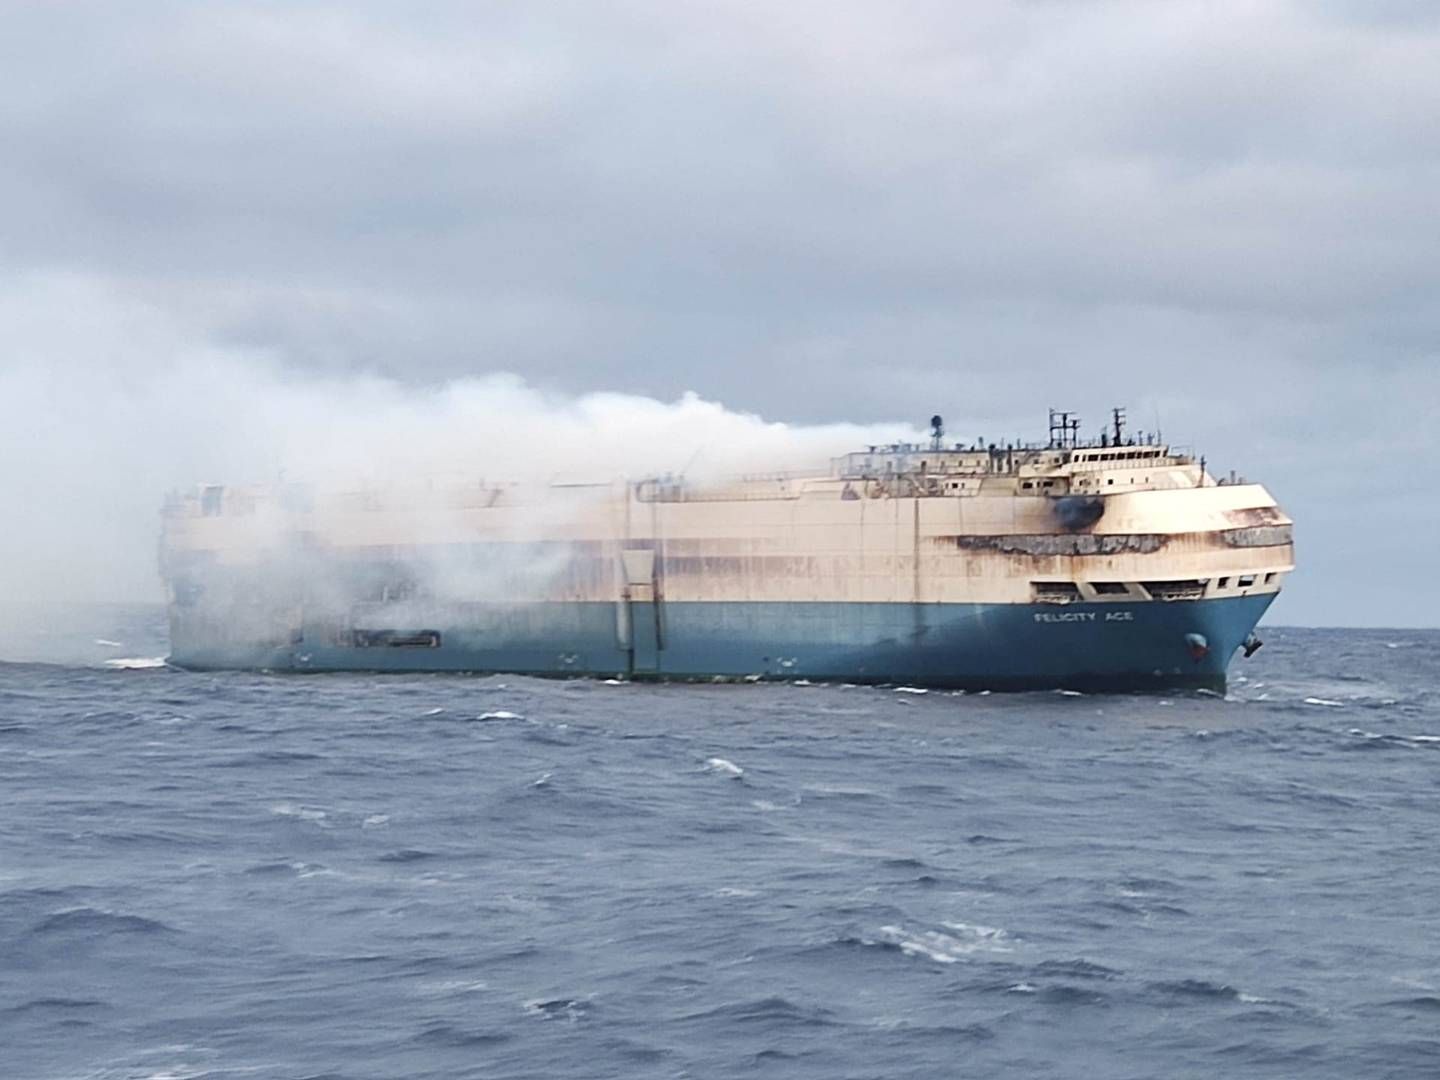 The ship Felicity Ace, en route from Emden, Germany, where Volkswagen has a factory, to Davisville, Rhode Island, burns more than 100 km from the Azores in Portugal on February 18, 2022.